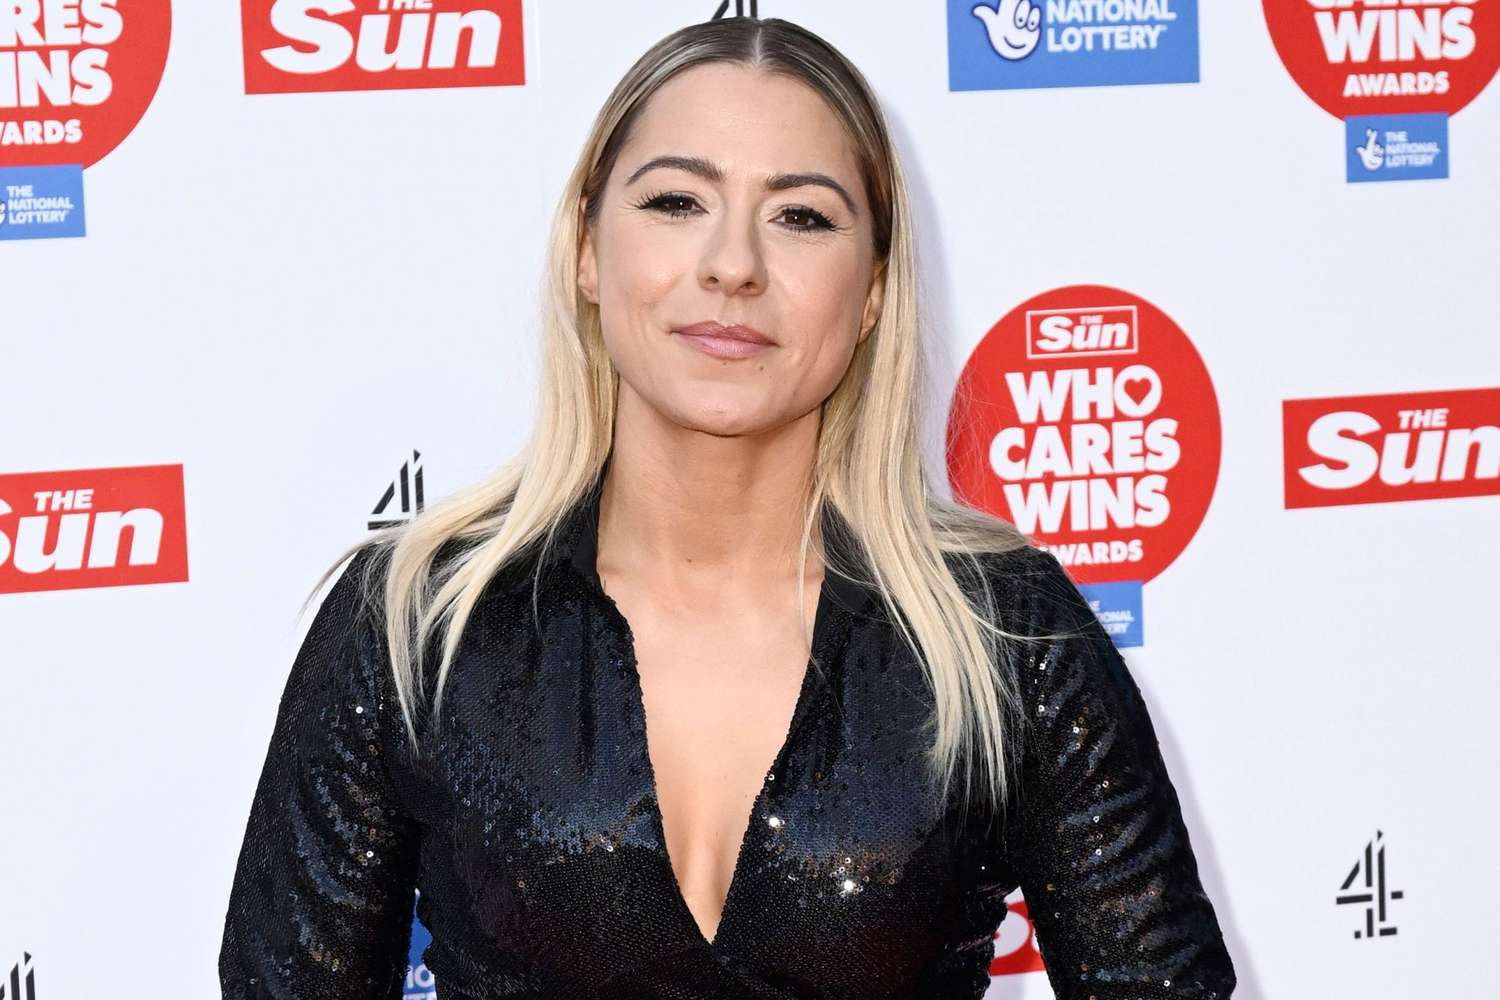 LONDON, ENGLAND - NOVEMBER 22: Lucy Spraggan attends The Sun's "Who Cares Wins" Awards 2022 at The Roundhouse on November 22, 2022 in London, England. (Photo by Gareth Cattermole/Getty Images)